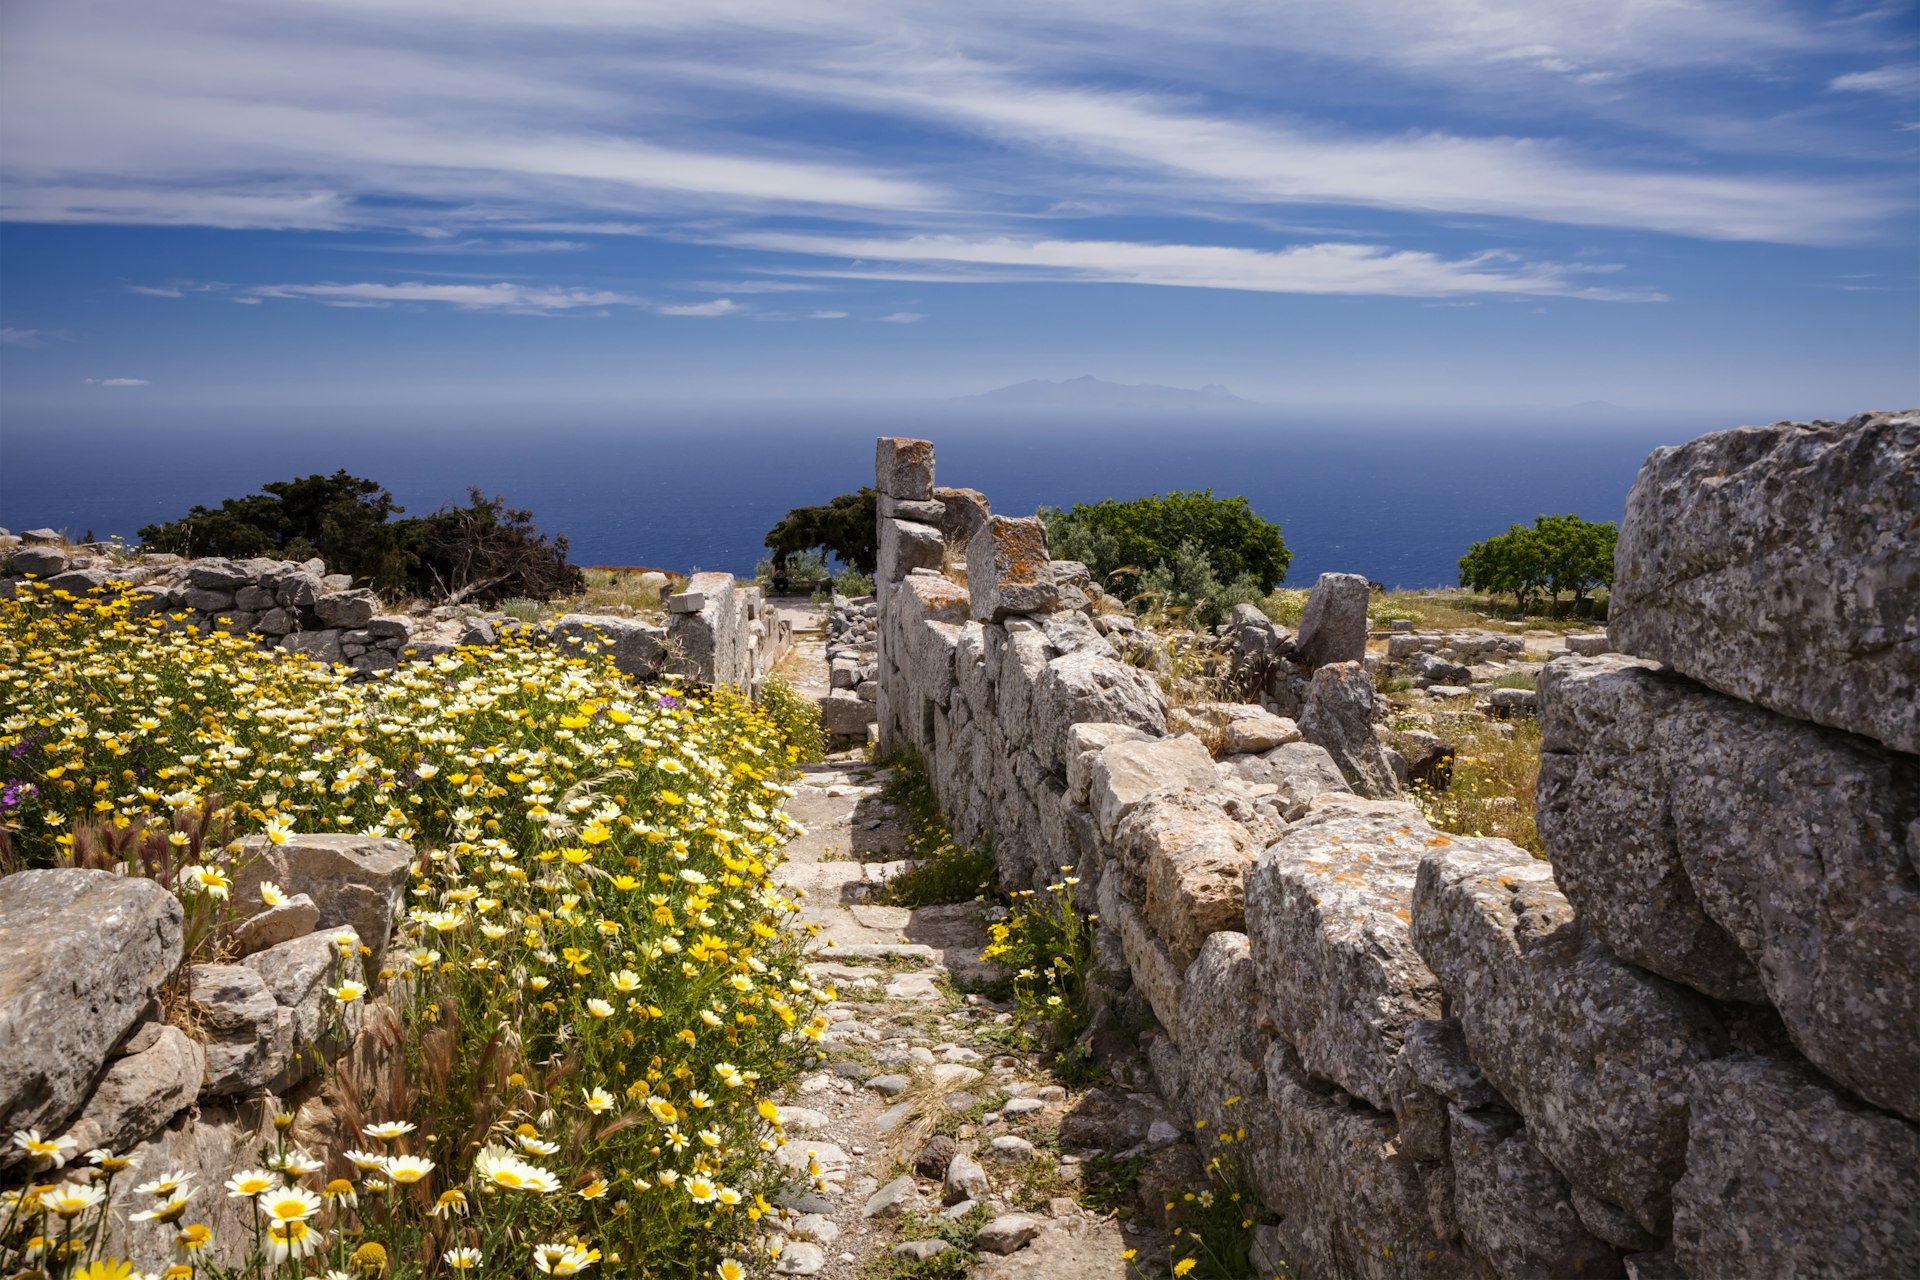 An ancient clifftop settlement with stone walls lined with wildflowers